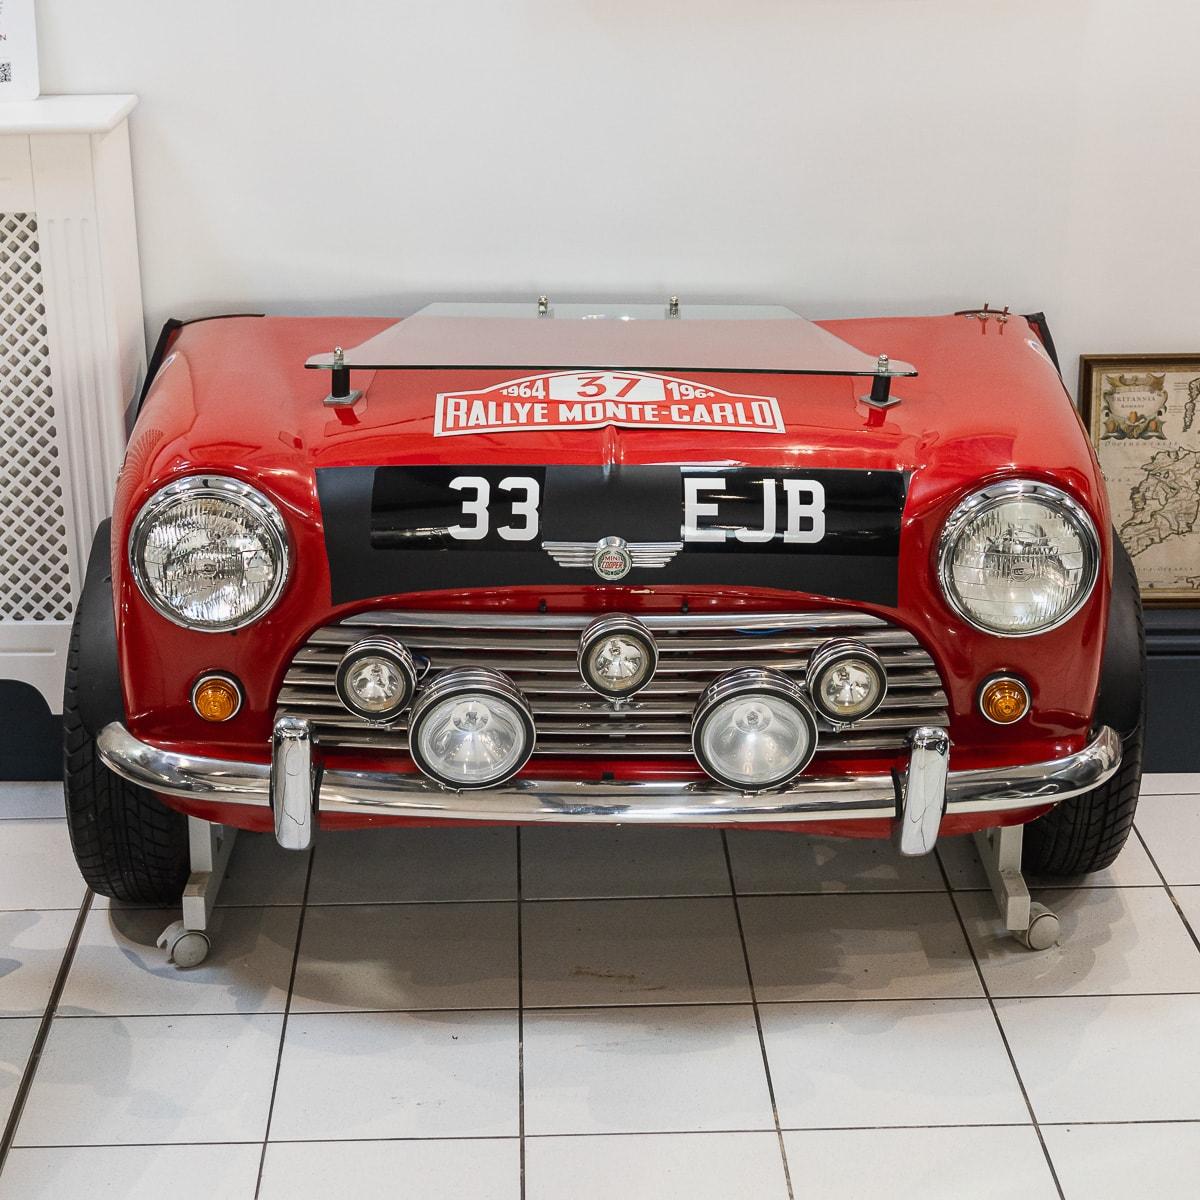 An Unusual 1964 Monte Carlo Rally Replica Mini Front End, in the form of a desk (modern), with glass shelf and a speedometer converted to a clock, the head lamps electrified, on a metal frame with castors. The desk design is based on Paddy Hopkirk's